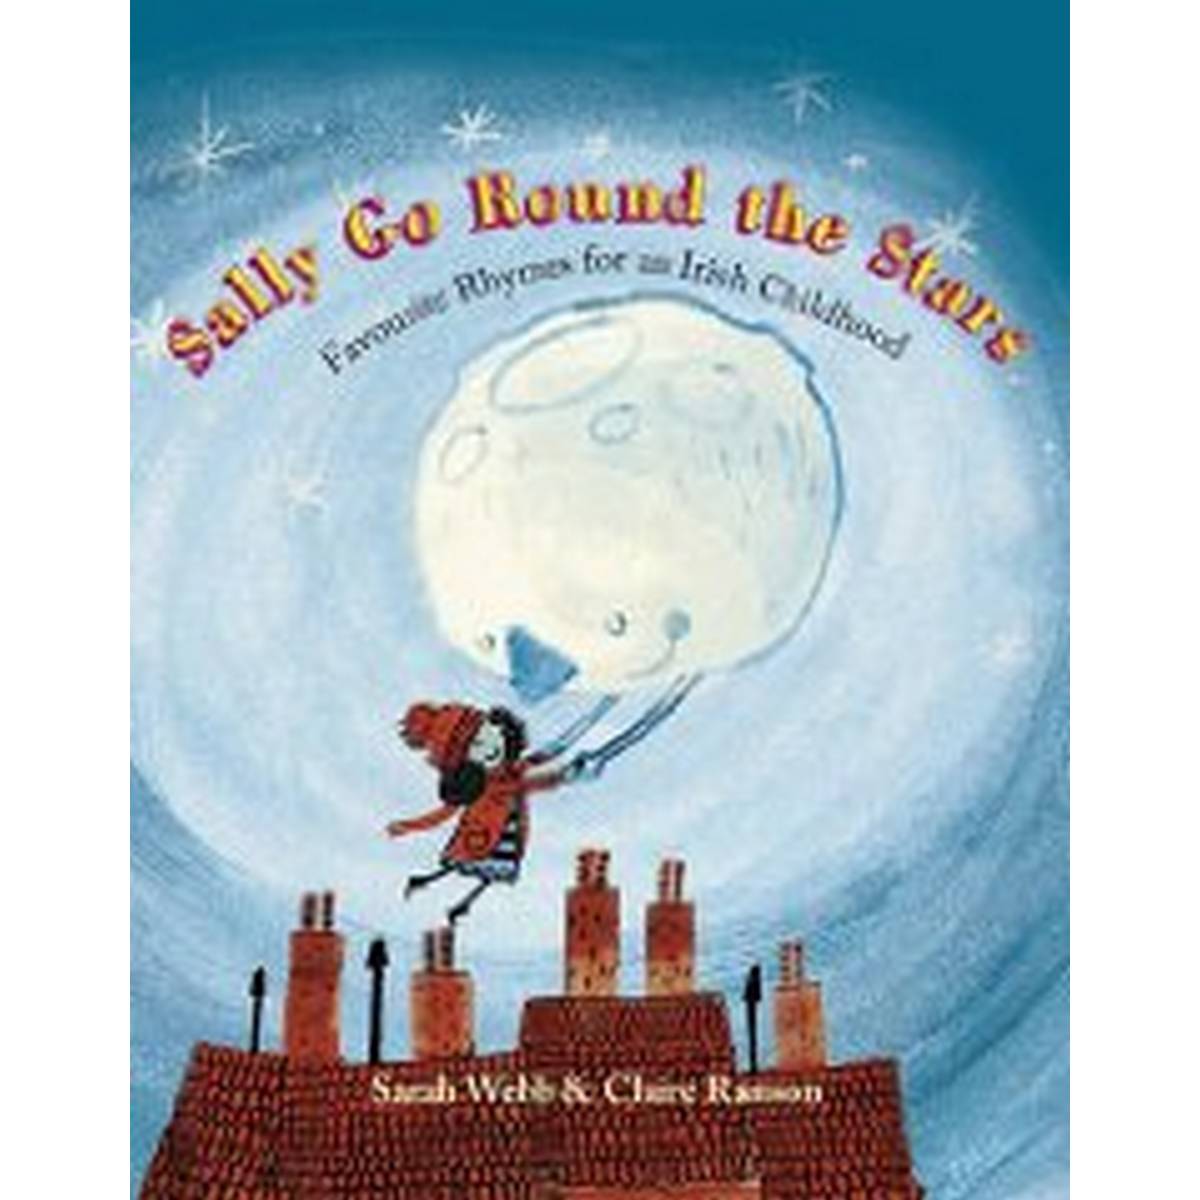 Sally Go Round The Stars: Favourite Rhymes for an Irish Childhood